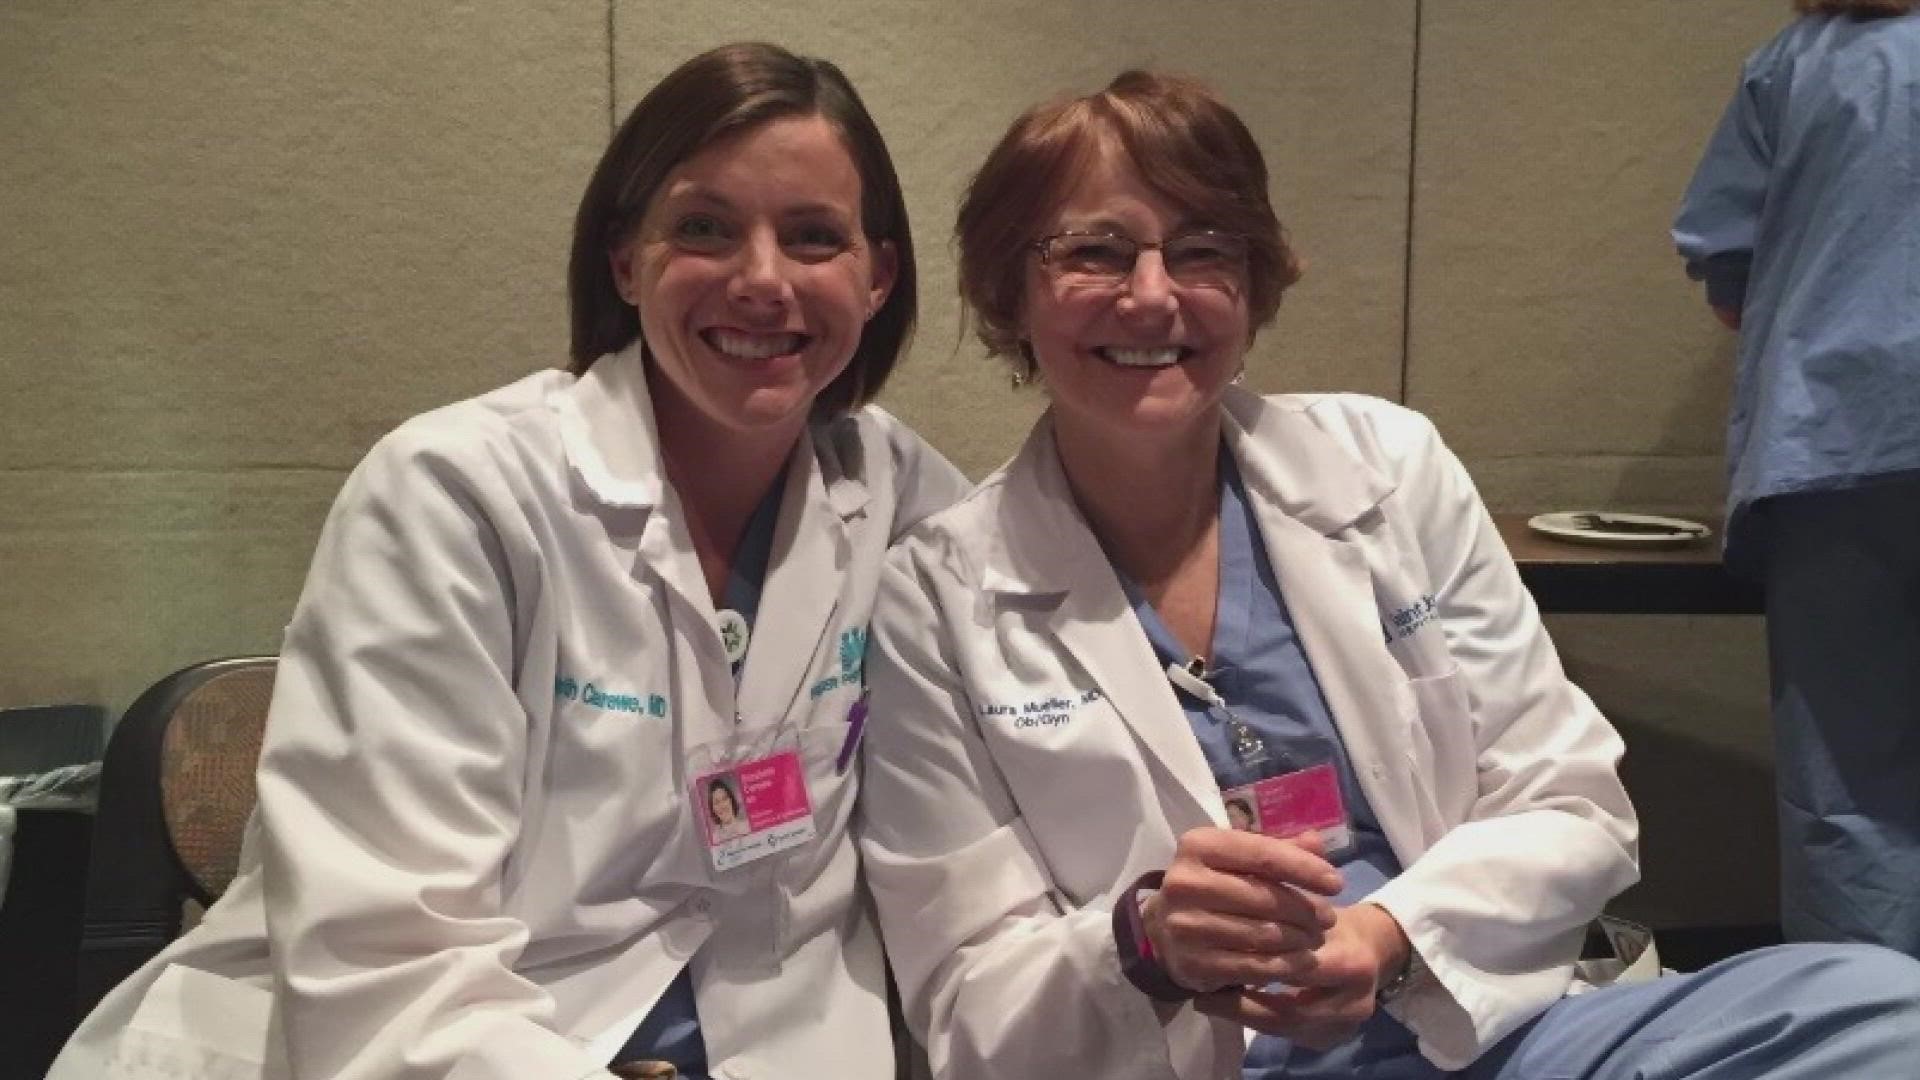 Dr. Laura Mueller is a retired OBGYN. Her daughter, Dr. Beth Carewe, practices at Premier Integrated OBGYN and delivers babies at Rose Medical Center in Denver.